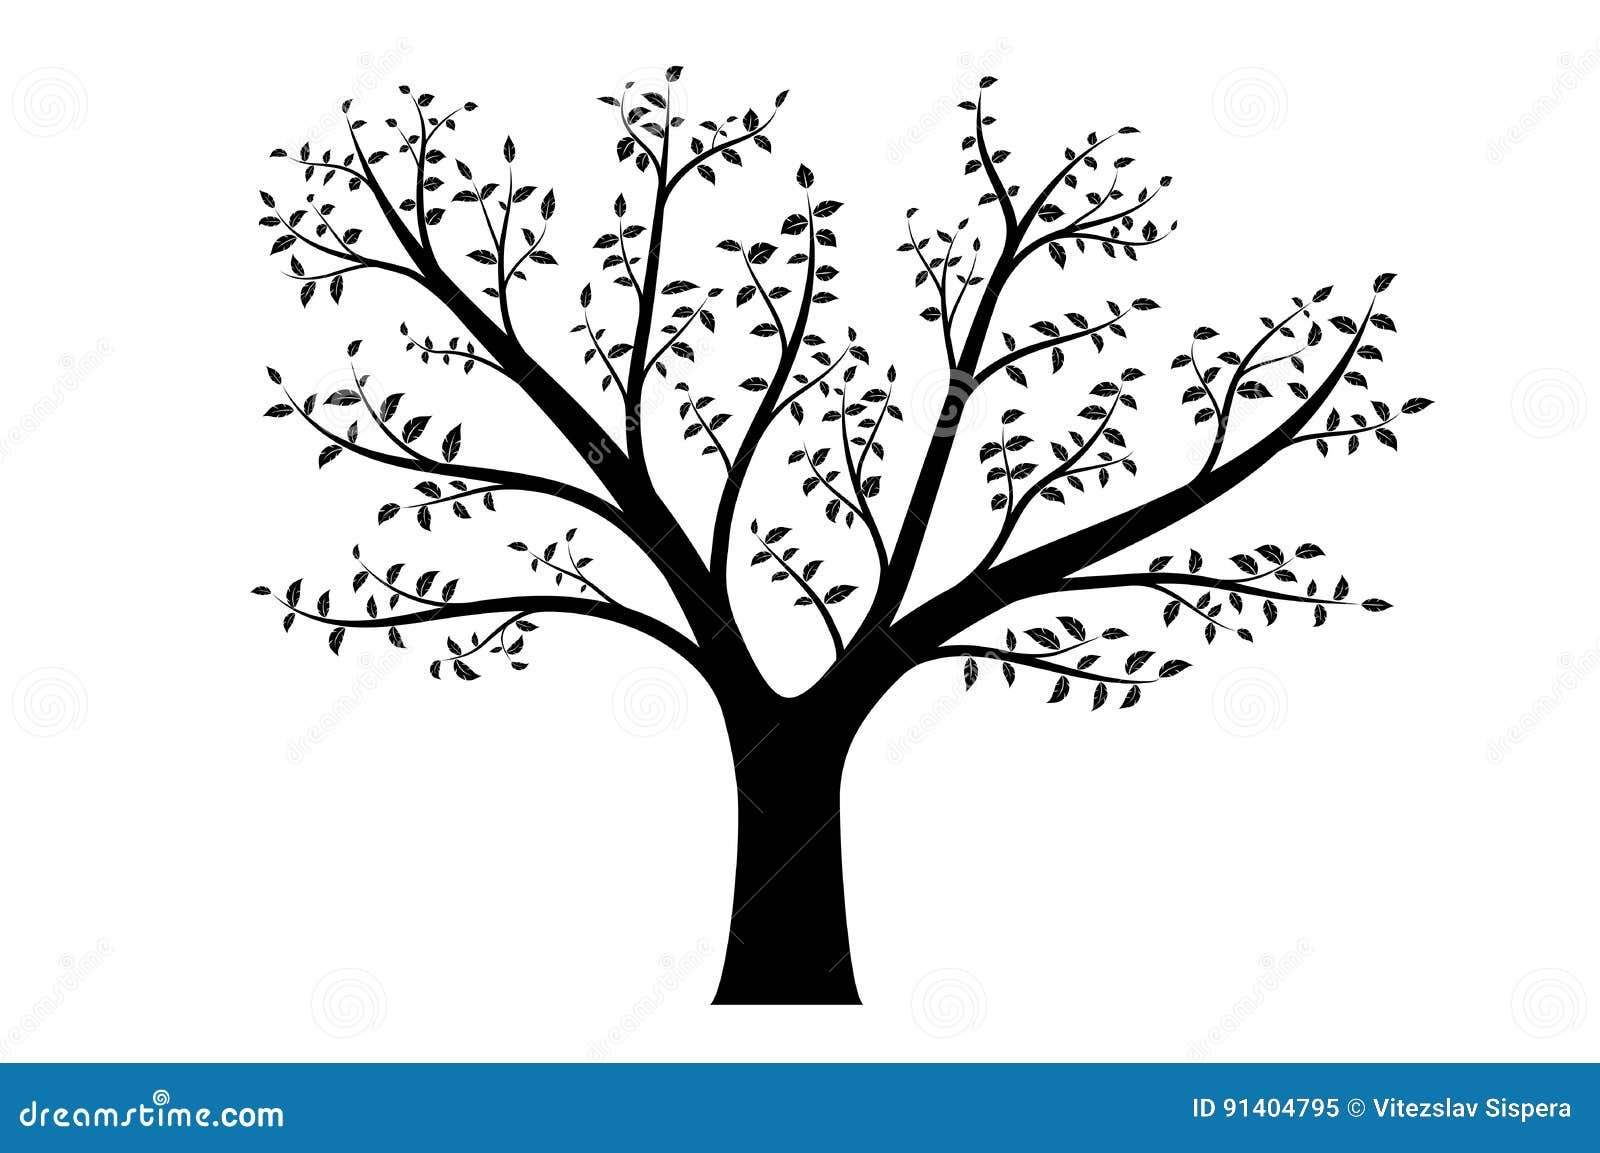 realistic   of tree with branches and leaves, 